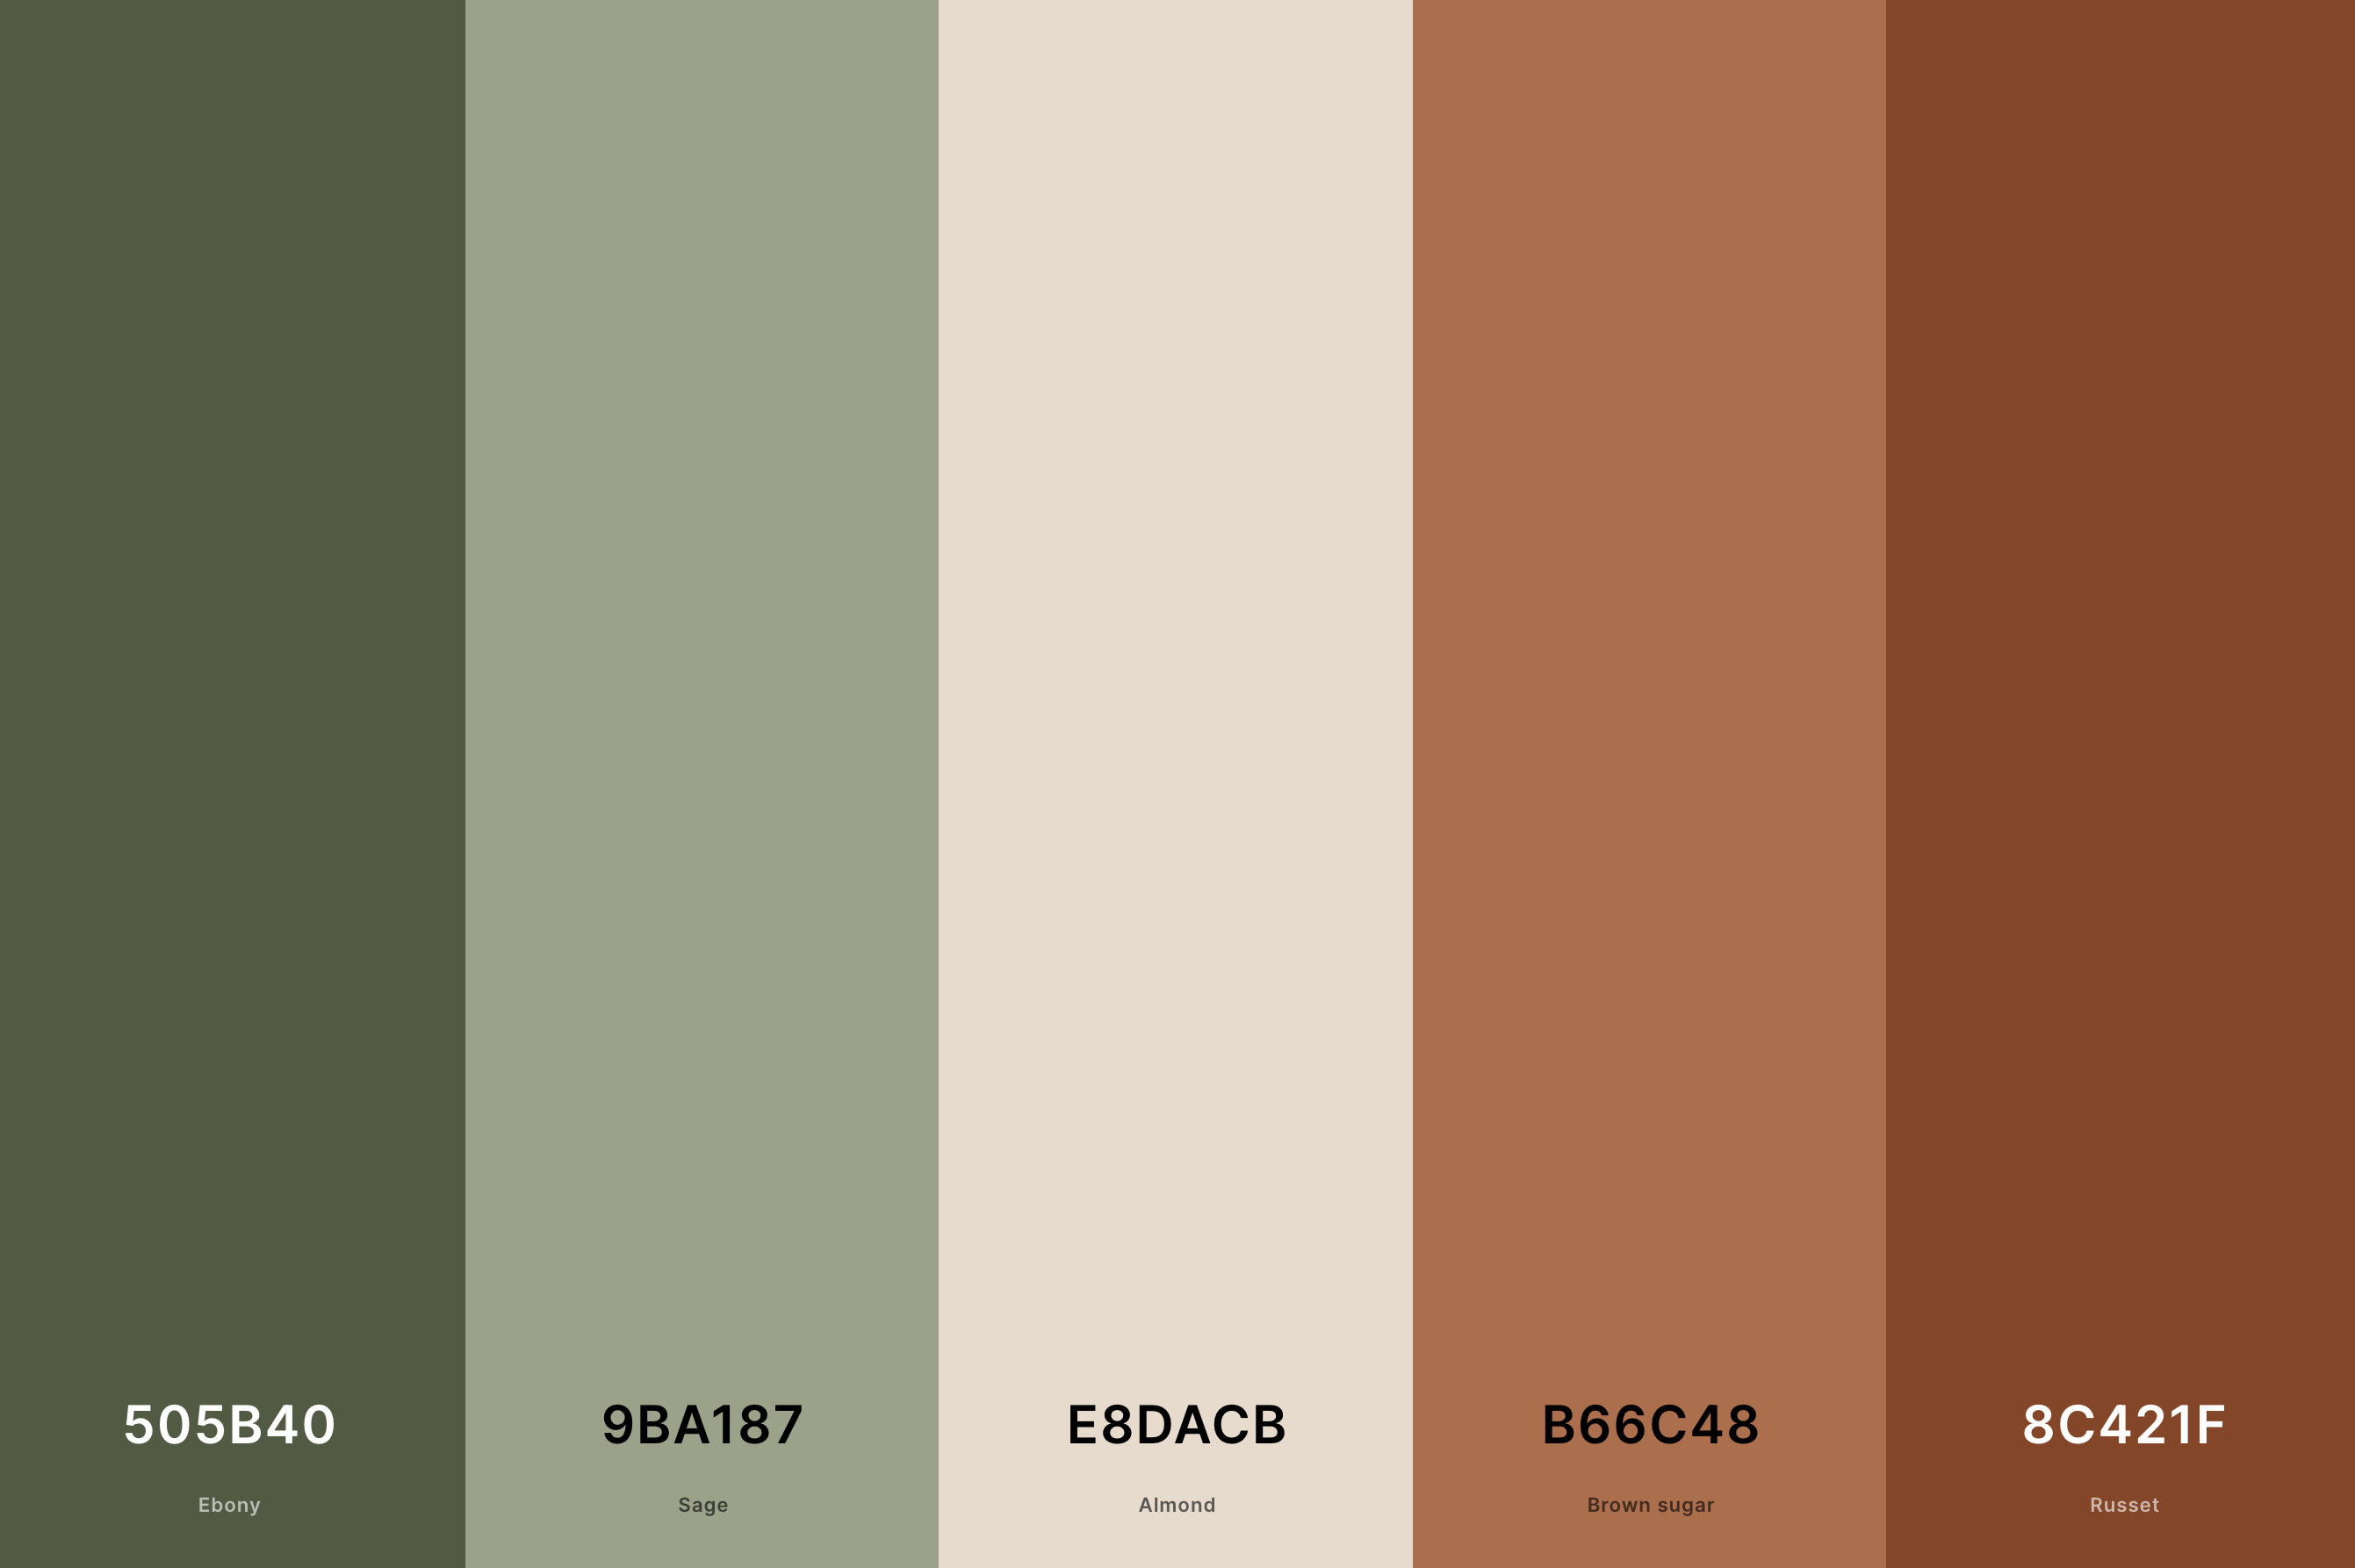 7. Terracotta And Sage Green Color Palette Color Palette with Ebony (Hex #505B40) + Sage (Hex #9BA187) + Almond (Hex #E8DACB) + Brown Sugar (Hex #B66C48) + Russet (Hex #8C421F) Color Palette with Hex Codes